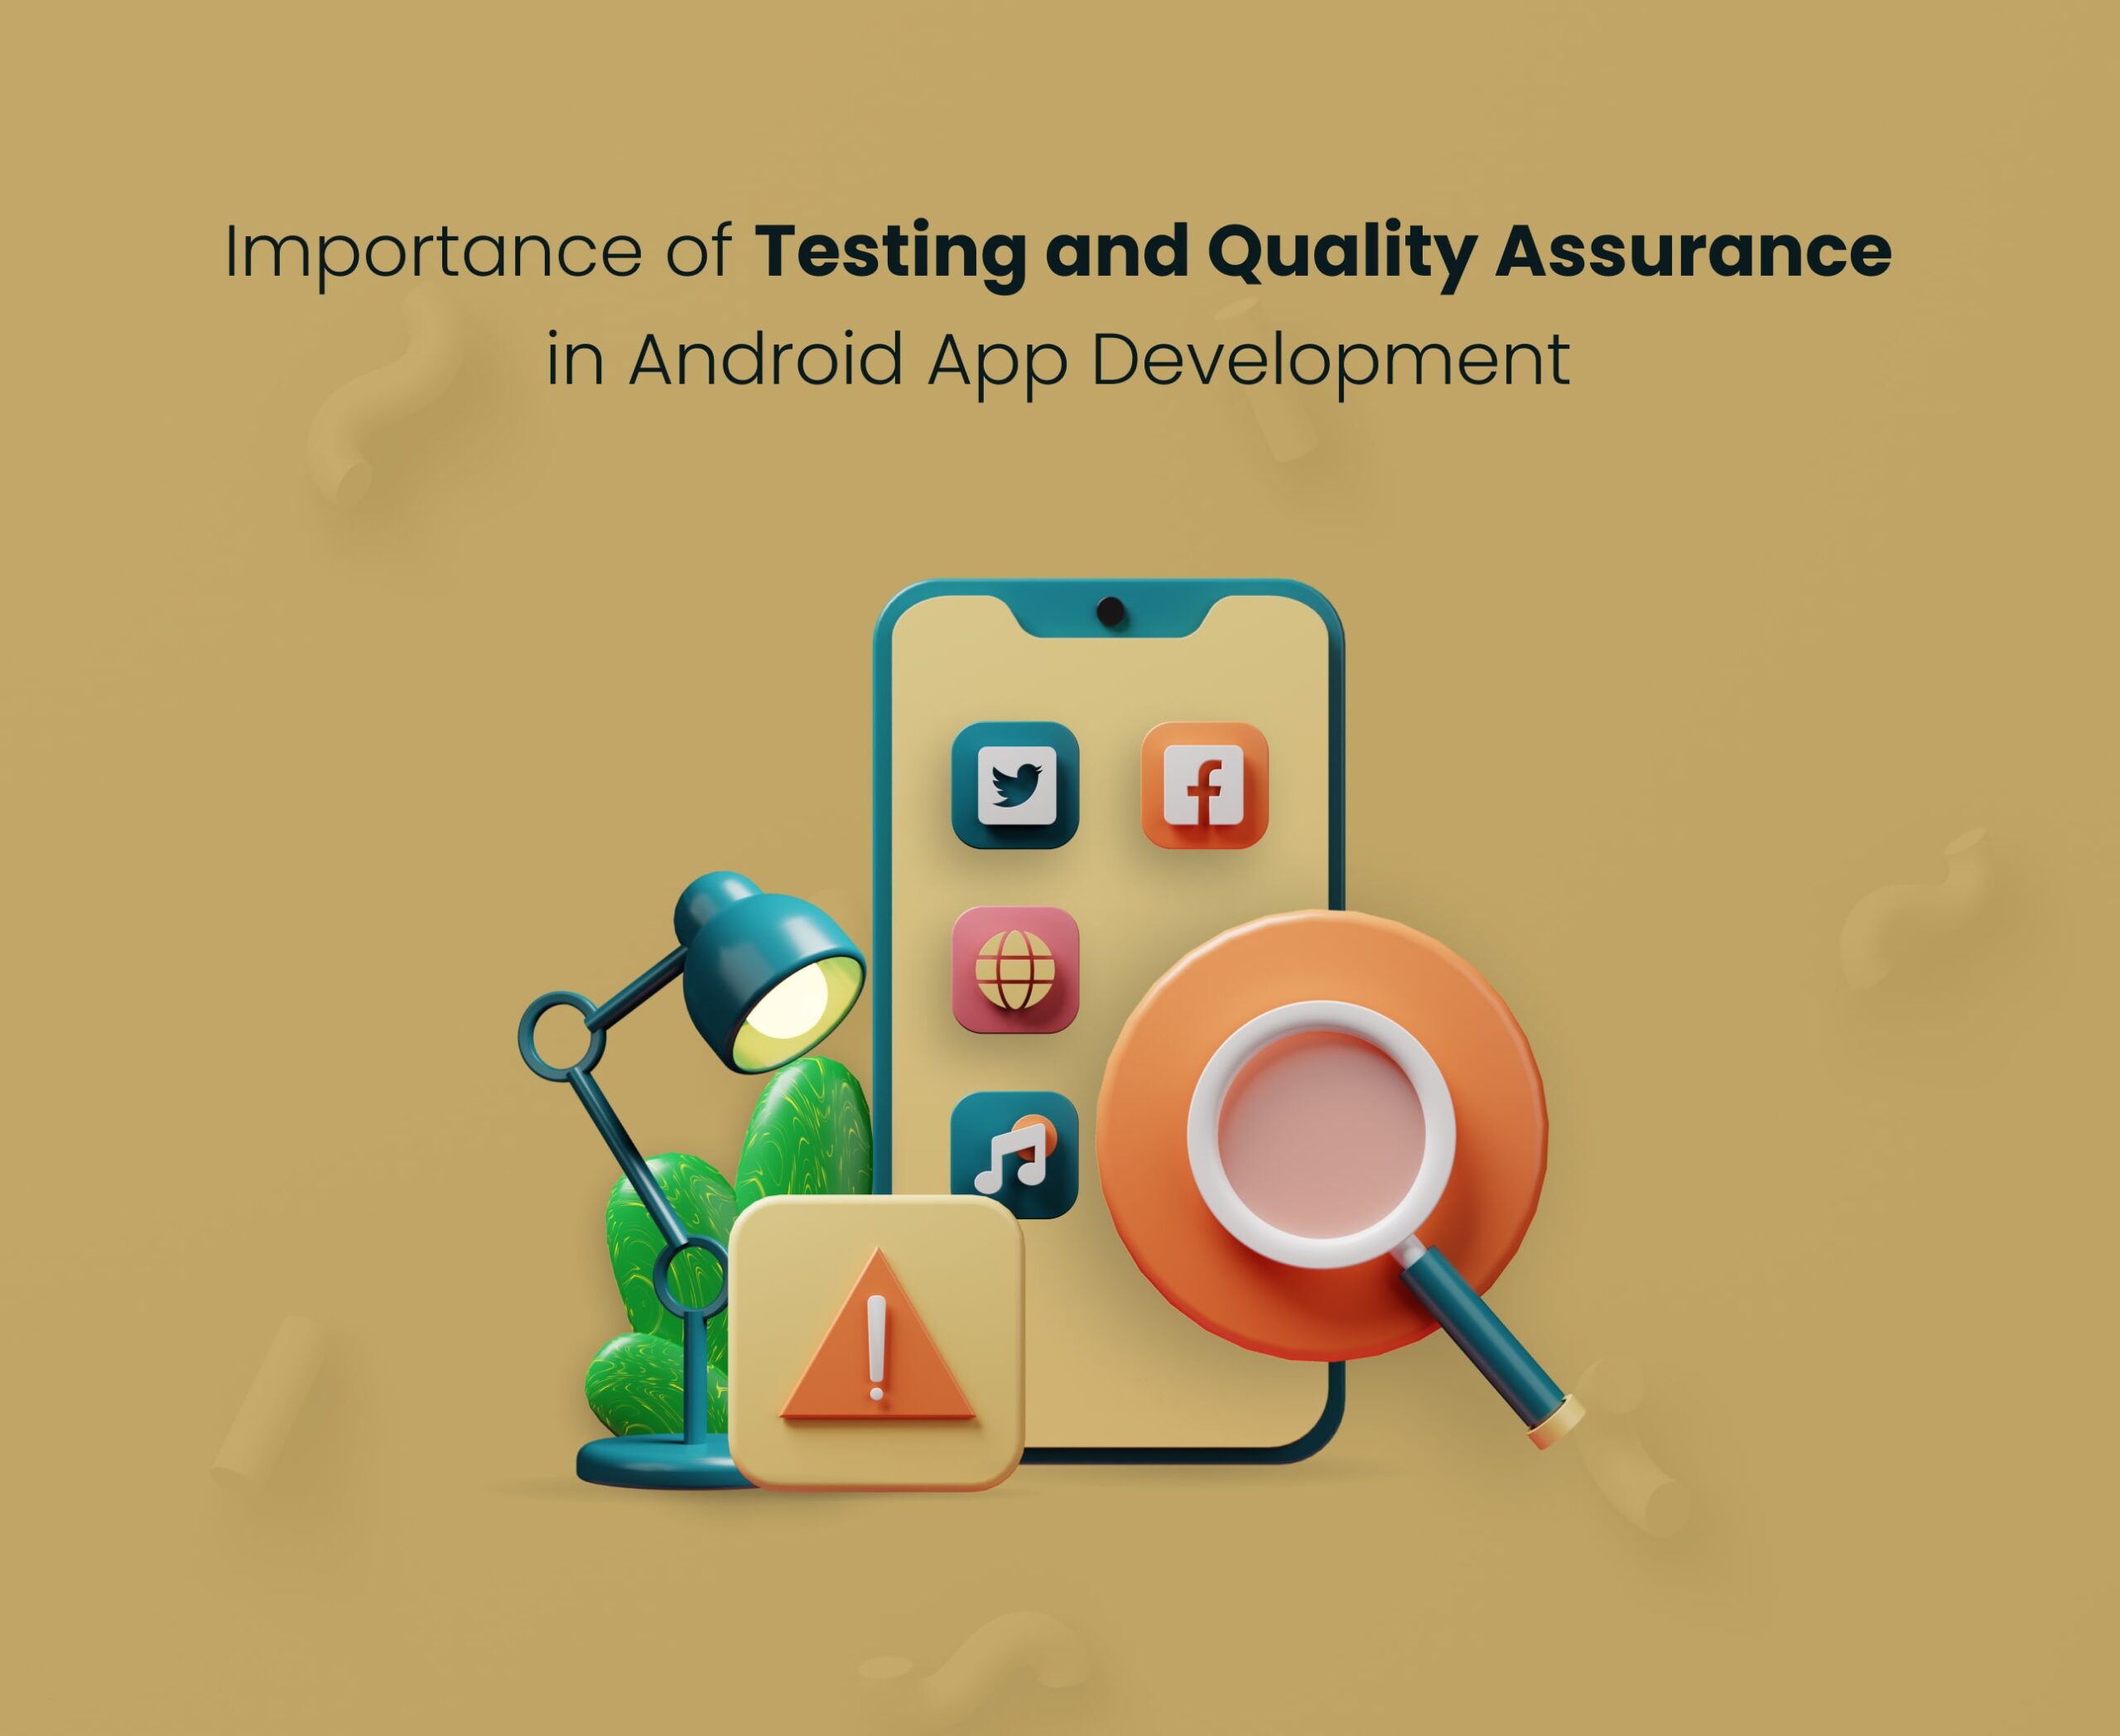 Importance of Testing and Quality Assurance in Android App Development